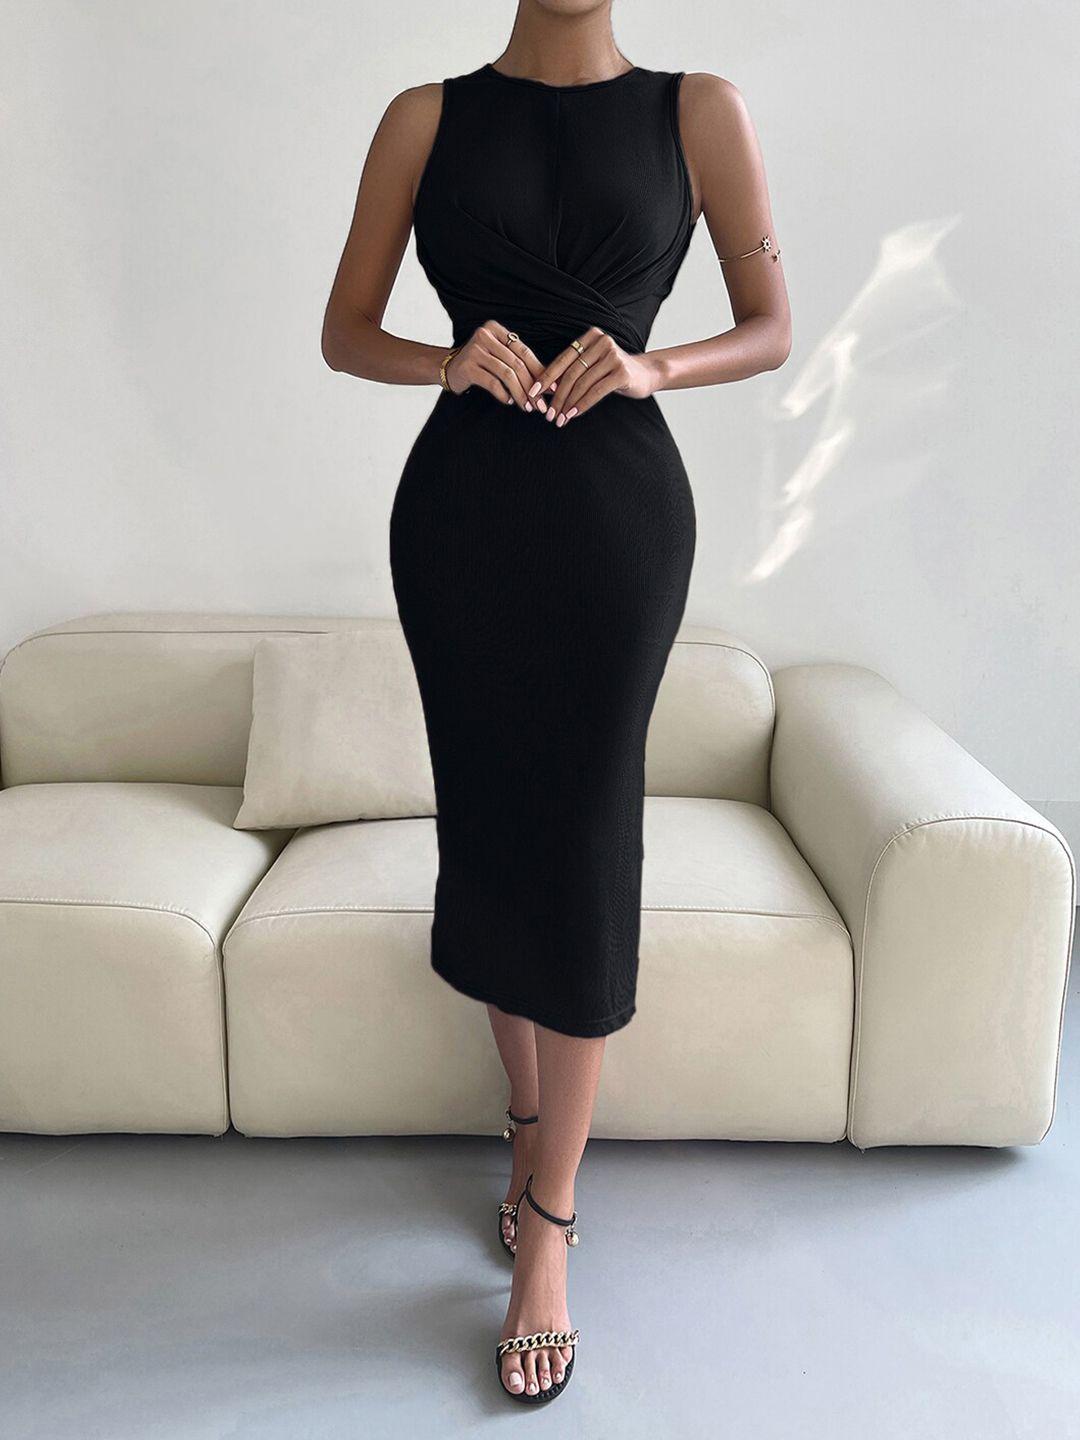 stylecast round neck knitted bodycon dress